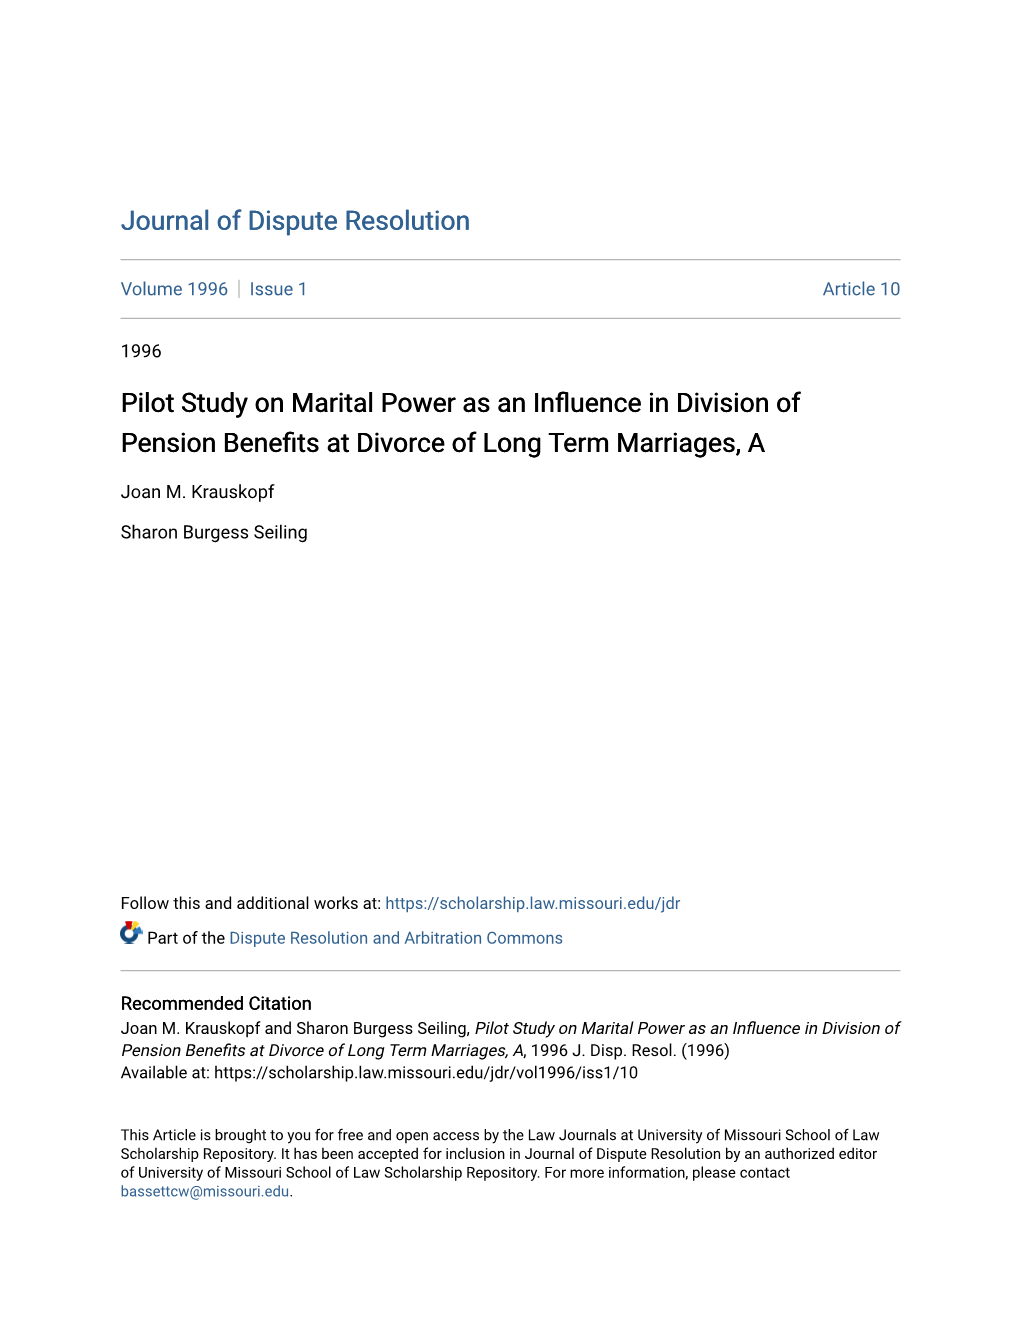 Pilot Study on Marital Power As an Influence in Division of Pension Benefits at Divorce of Long Term Marriages, A